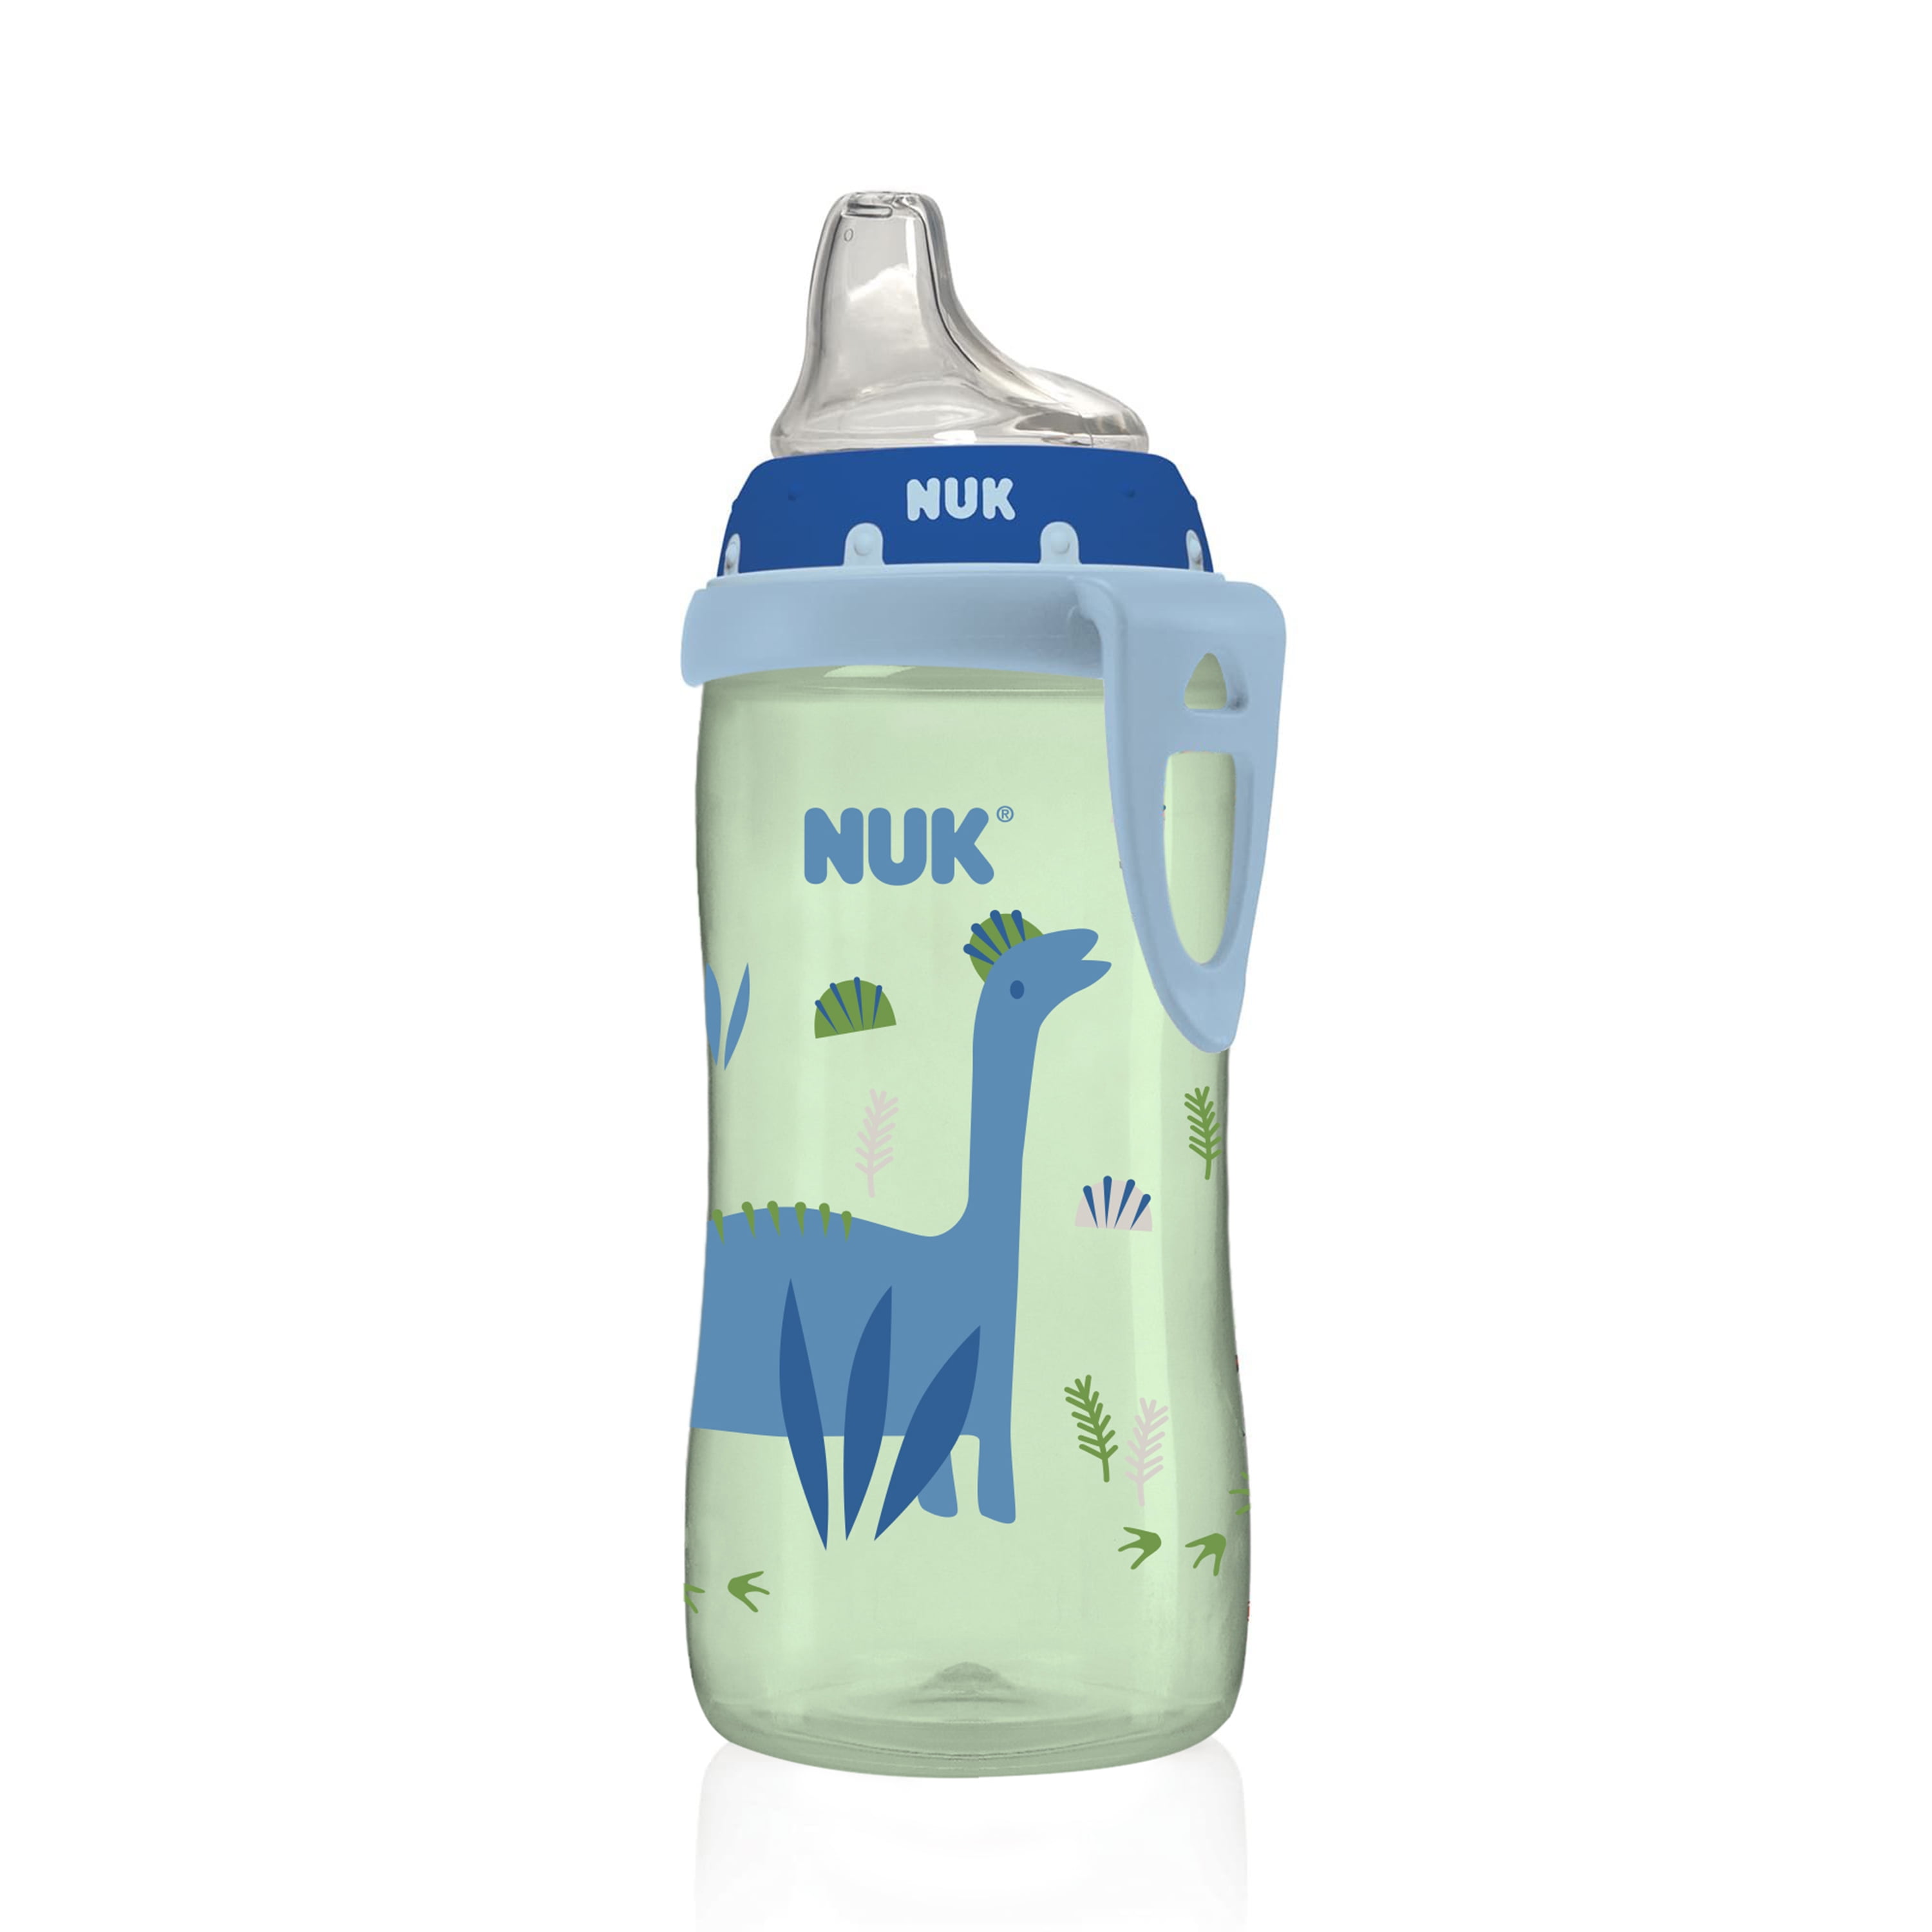 NUK Action Cup Toddler Cup with Chameleon Effect, 12+ Months, Colour  Changing, Twist Close Soft Drinking Straw, Leak-Proof, BPA-Free, Crocodile,  Green, 230 ml – BigaMart